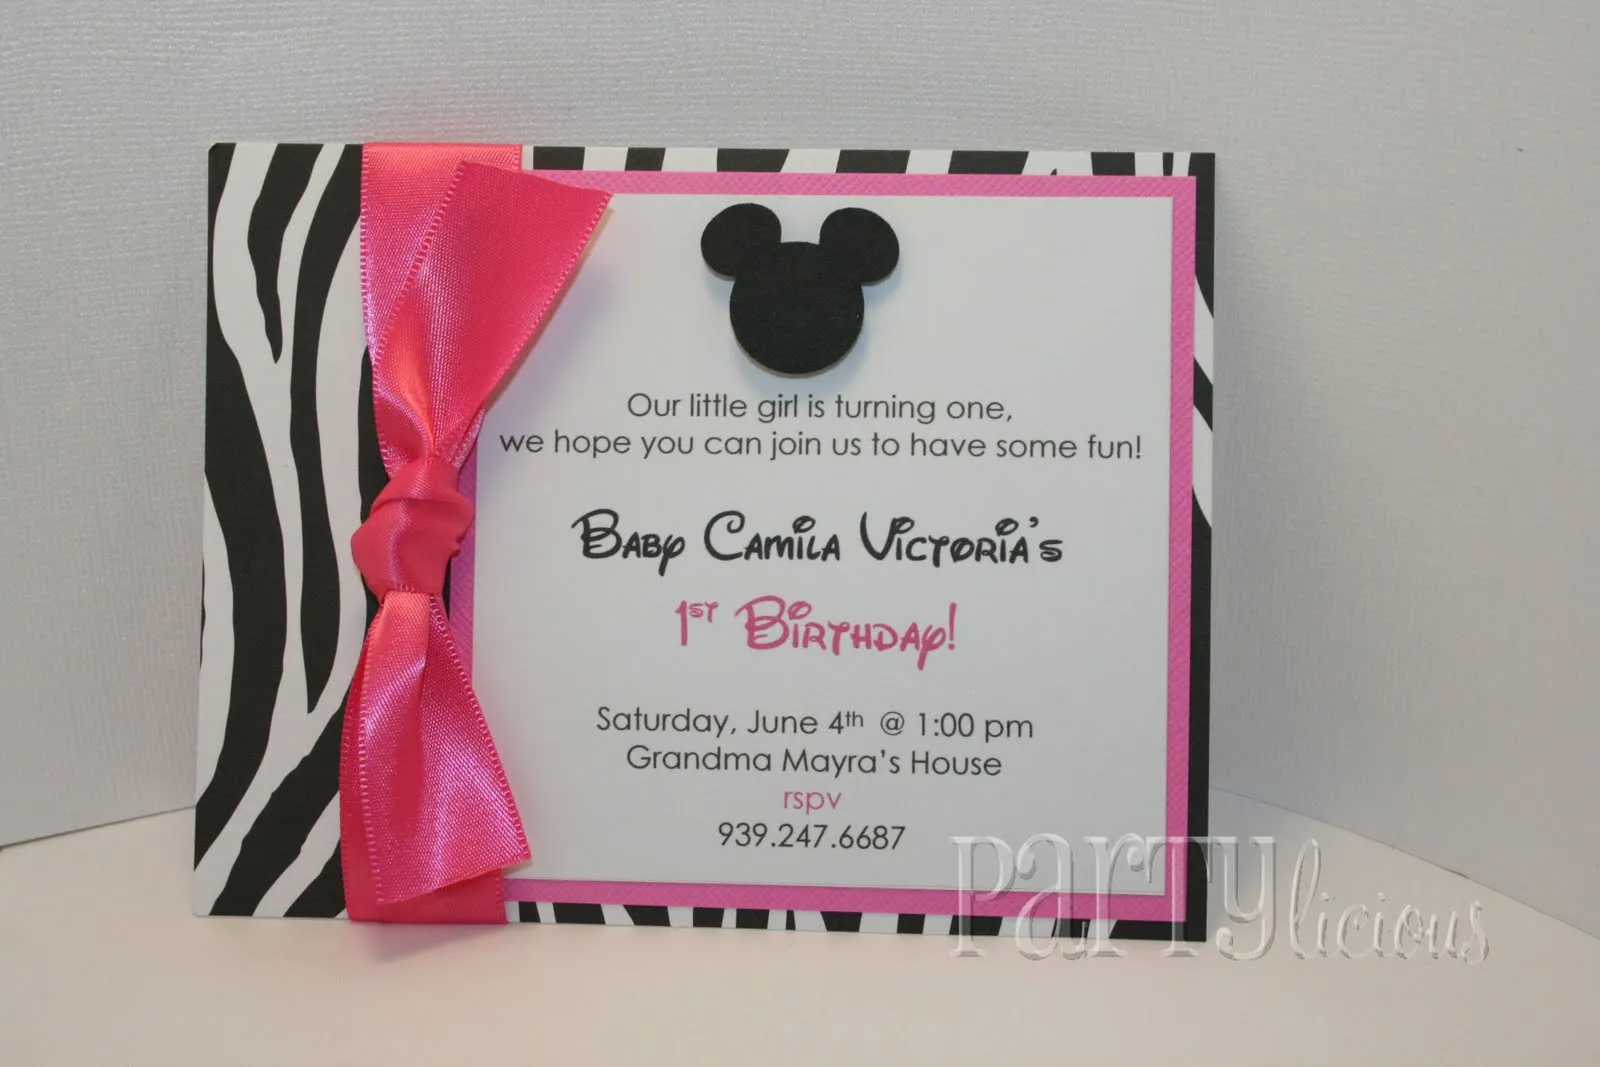  ... gorgeous party hat for the birthday girl with just enough zebra print